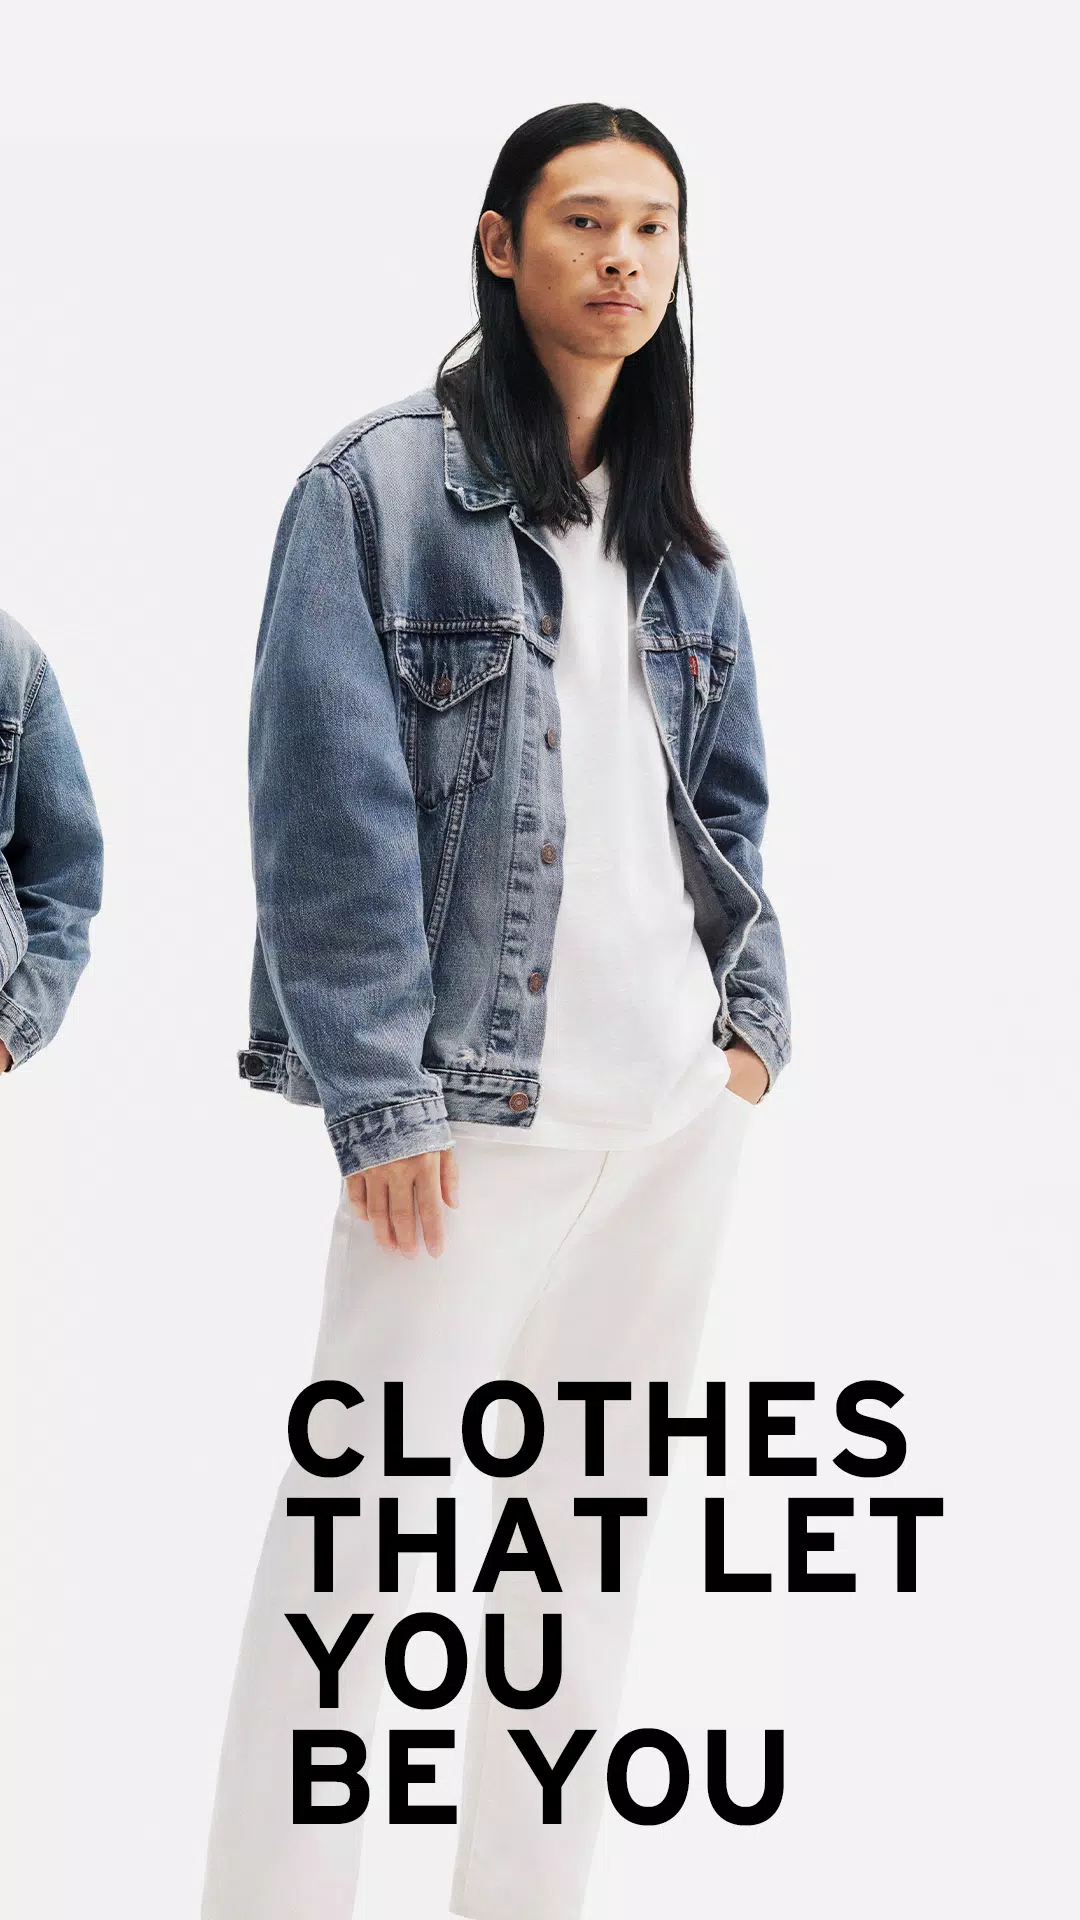 Levi's® APK for Android Download